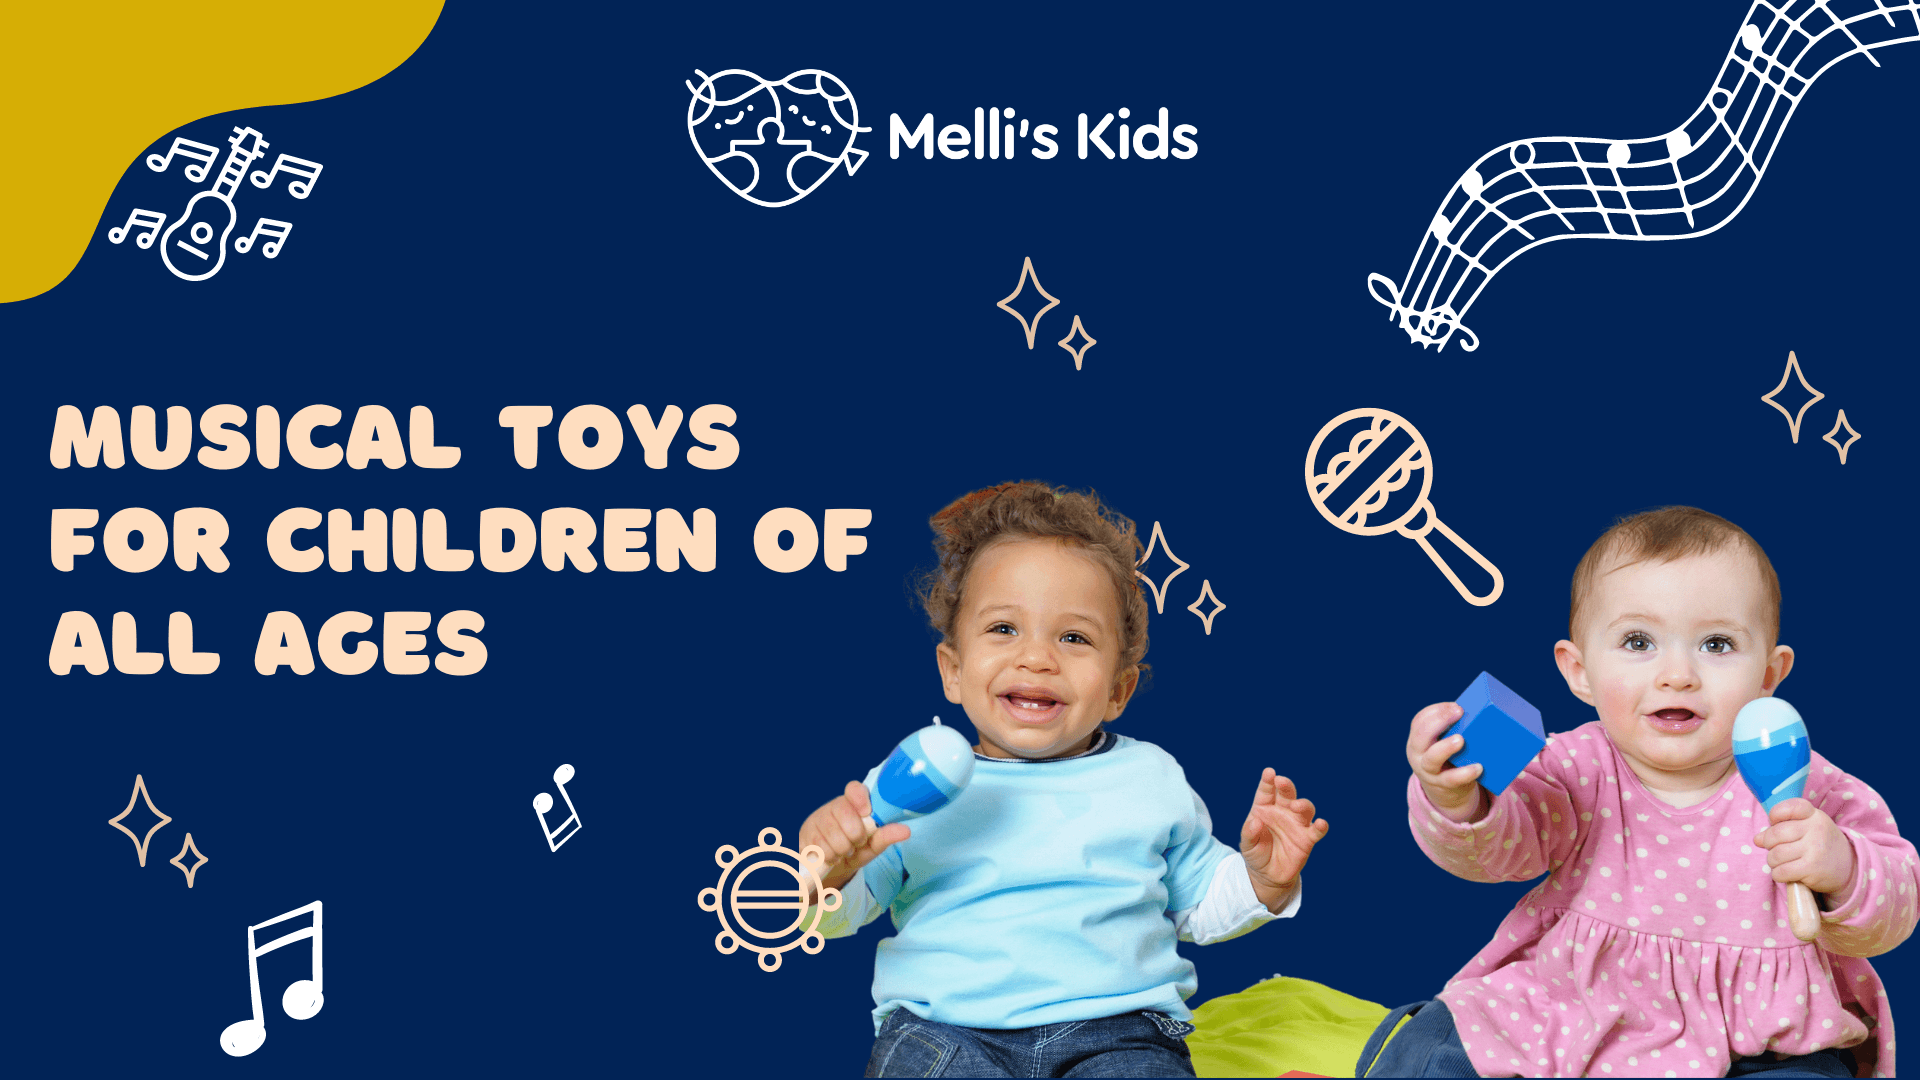 Musical instruments toys for children of all ages - Melli's Kids